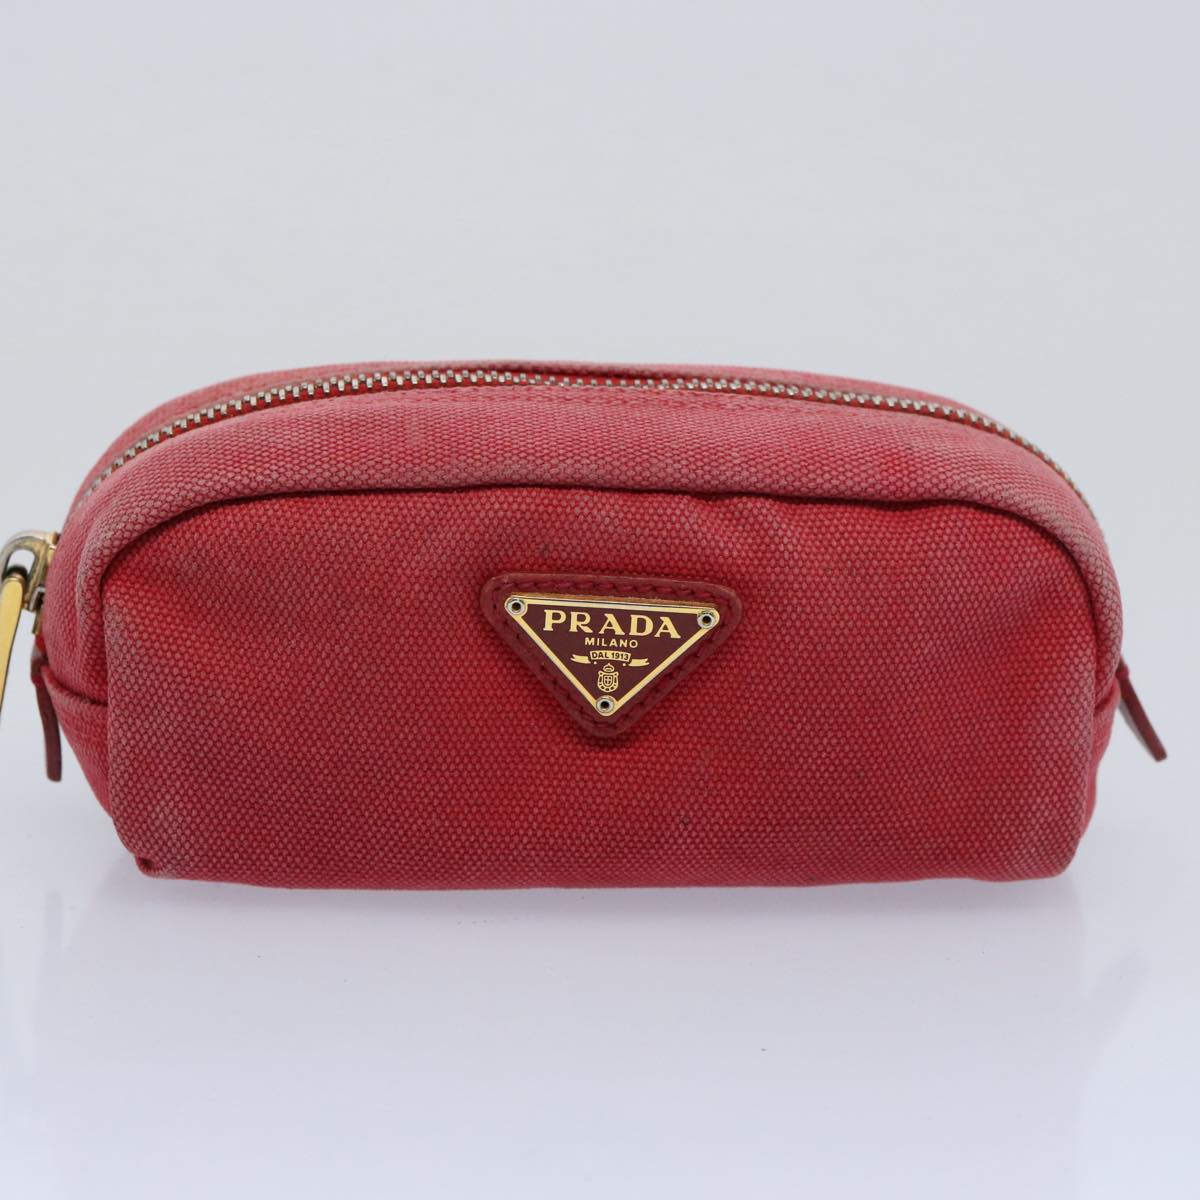 PRADA Wallet Pouch Canvas Leather 2Set Red Pink Auth yb473 - 0